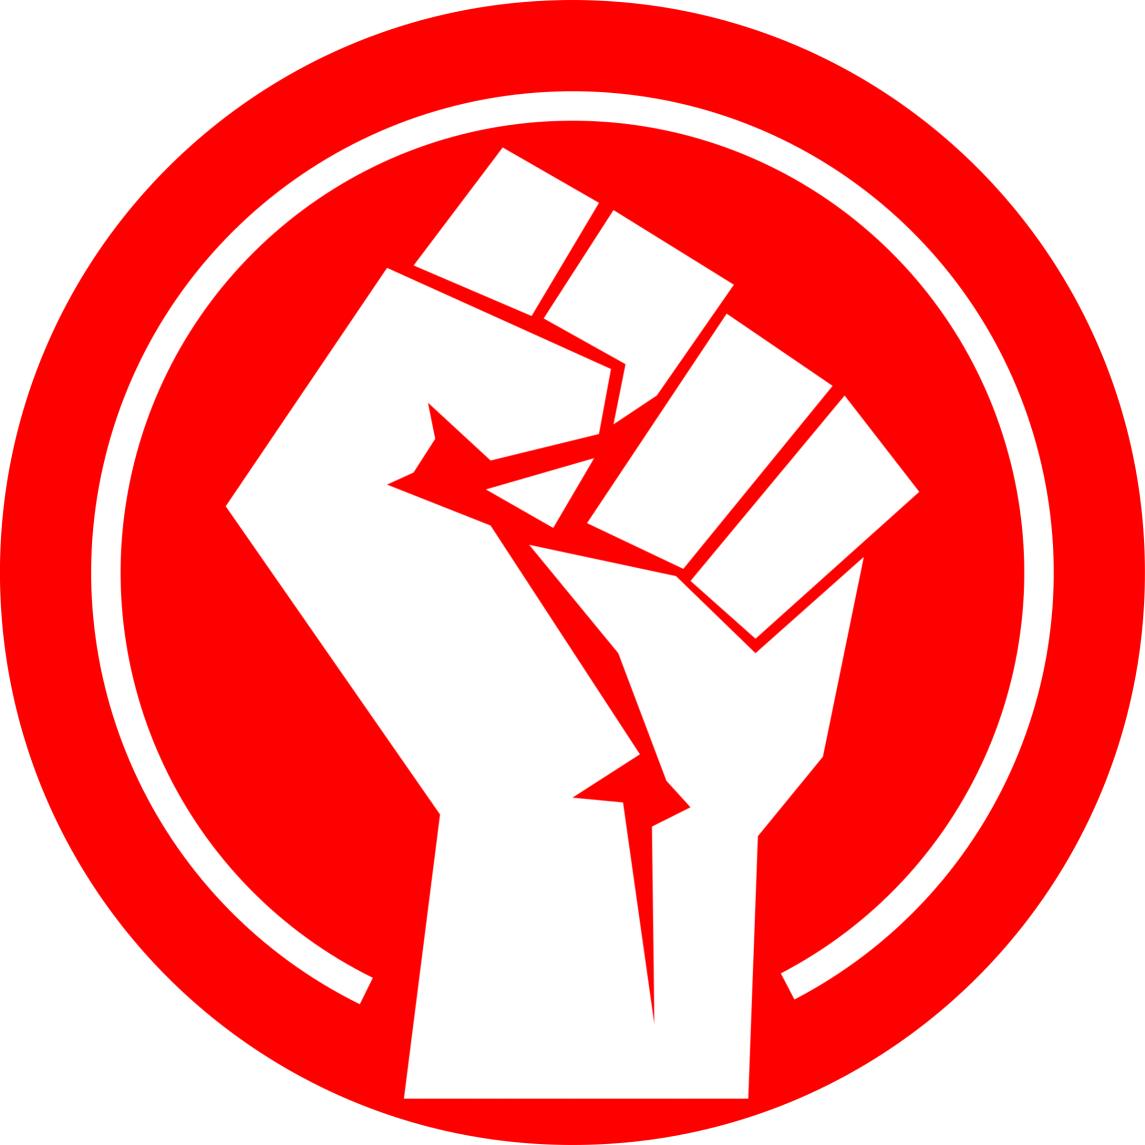 BLM Fist PNG Free Image